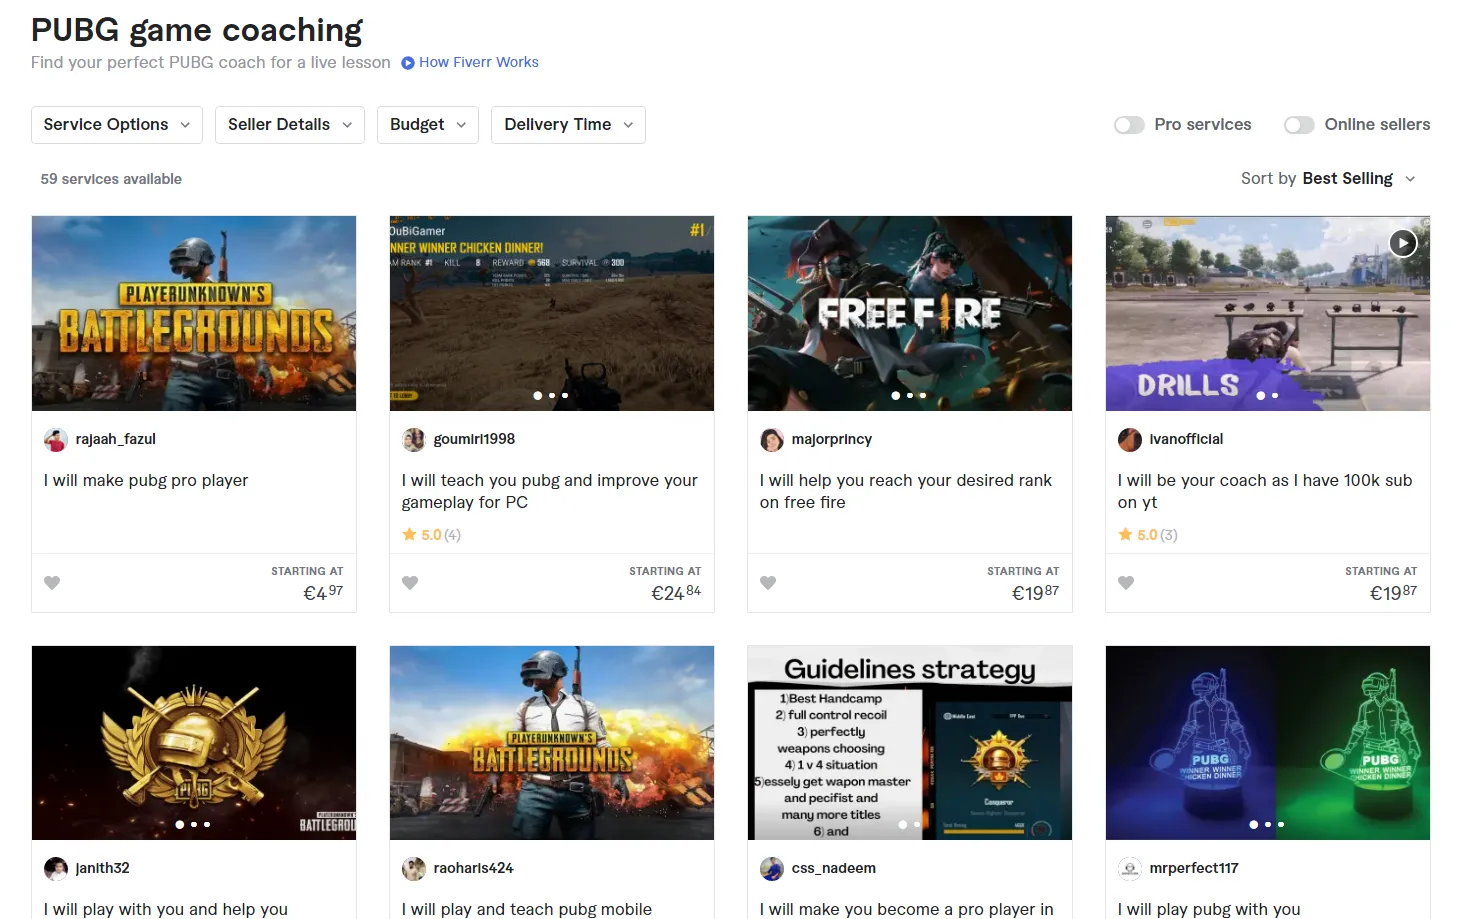 Some of the examples of PUBG coaching gigs on Fiverr.